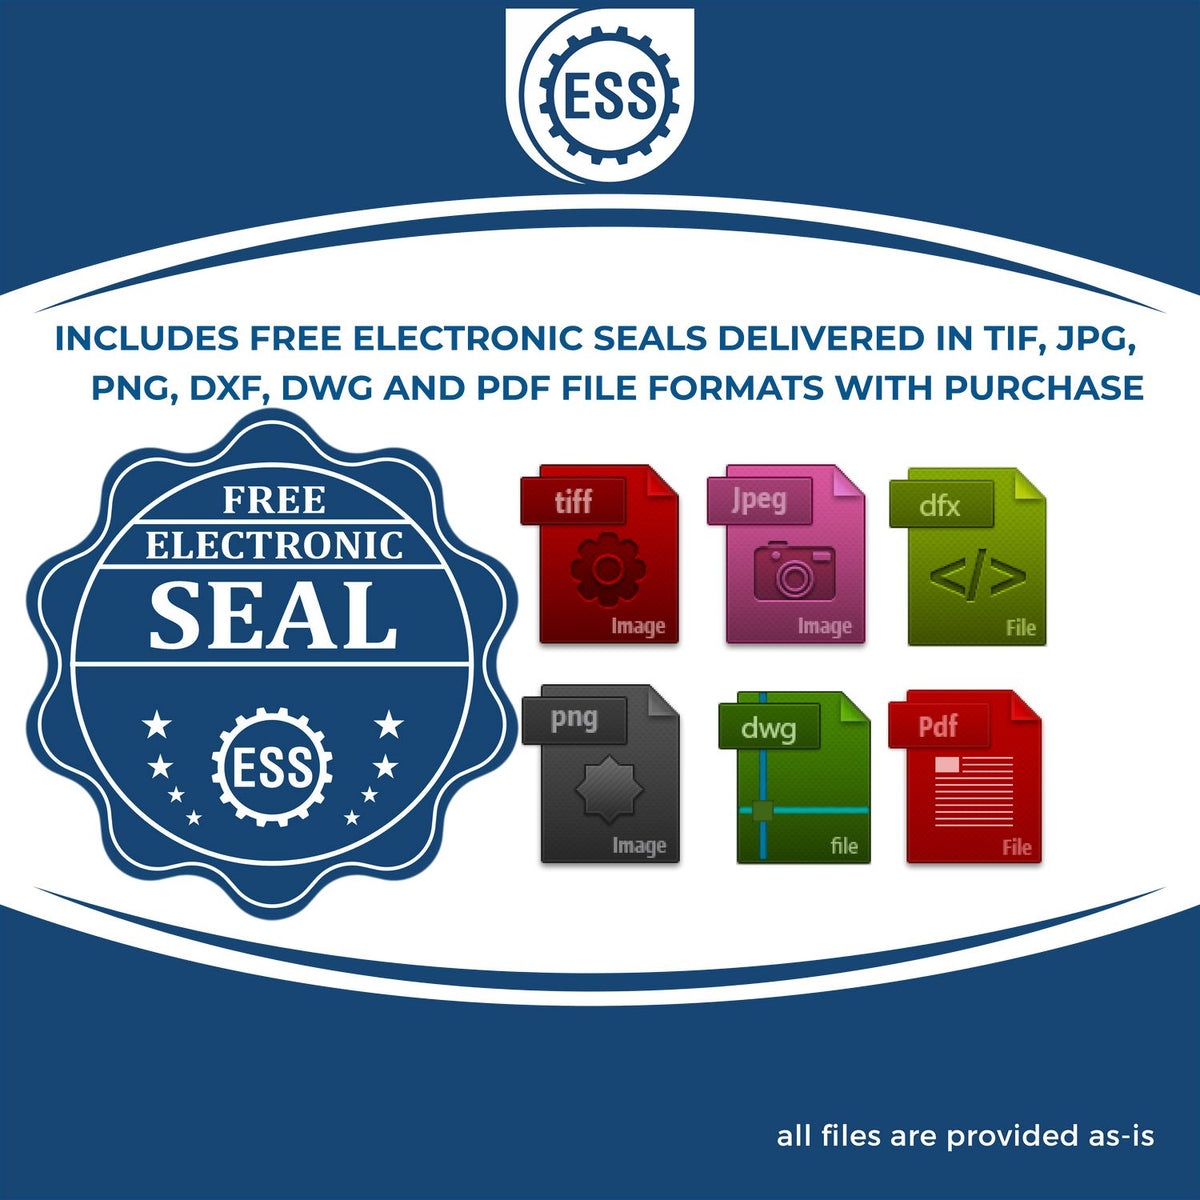 An infographic for the free electronic seal for the Hybrid Pennsylvania Geologist Seal illustrating the different file type icons such as DXF, DWG, TIF, JPG and PNG.